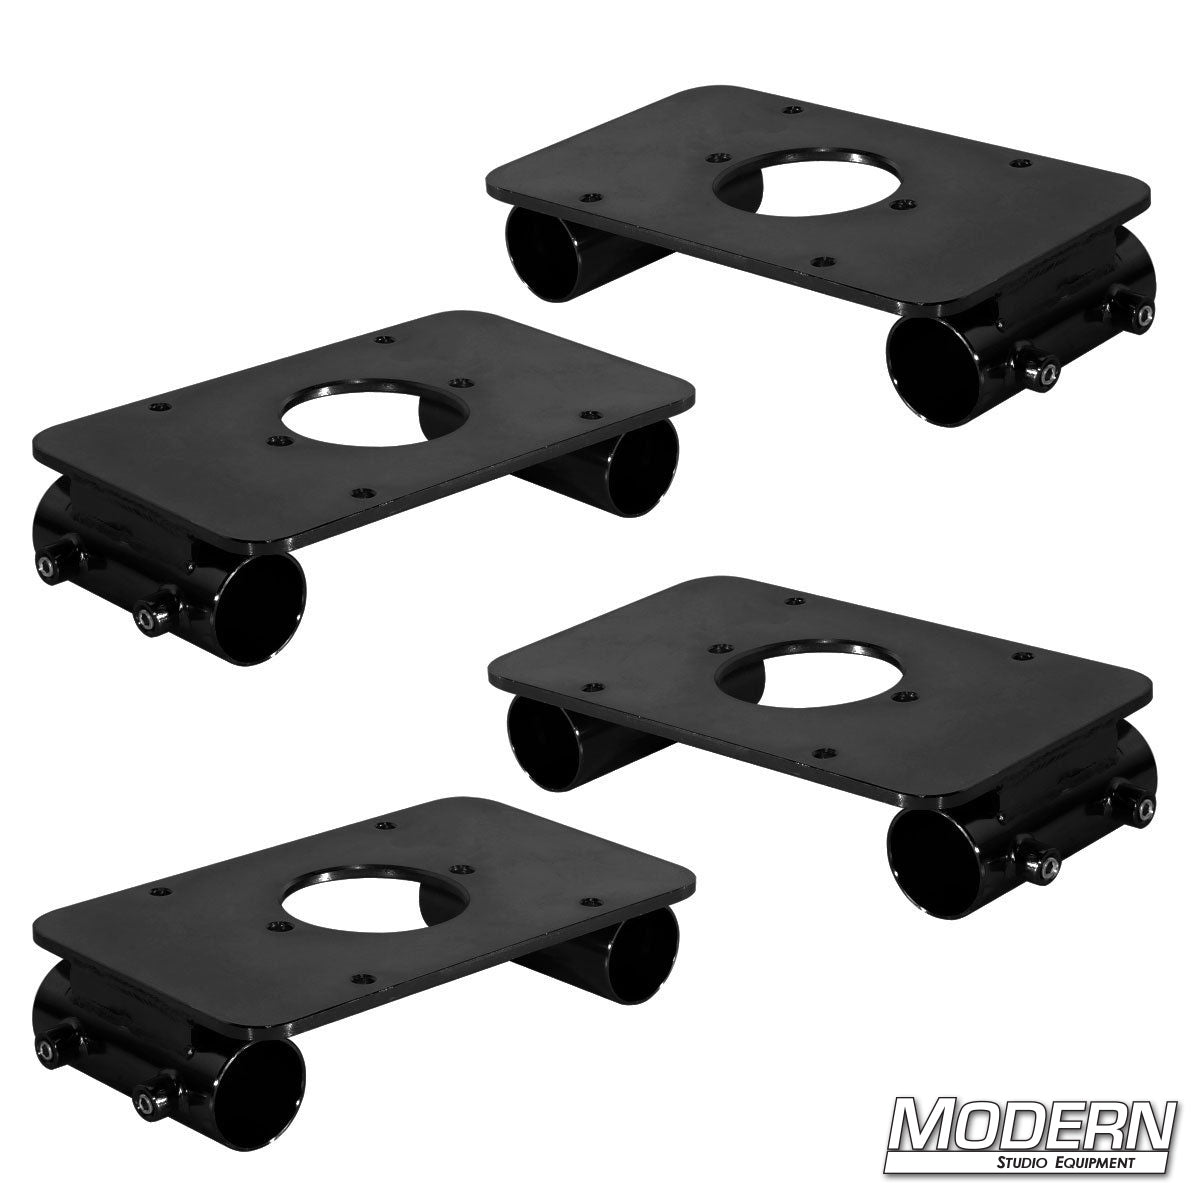 Skateboard Speed-Rail® Spreader without Wheels (Set of 4)